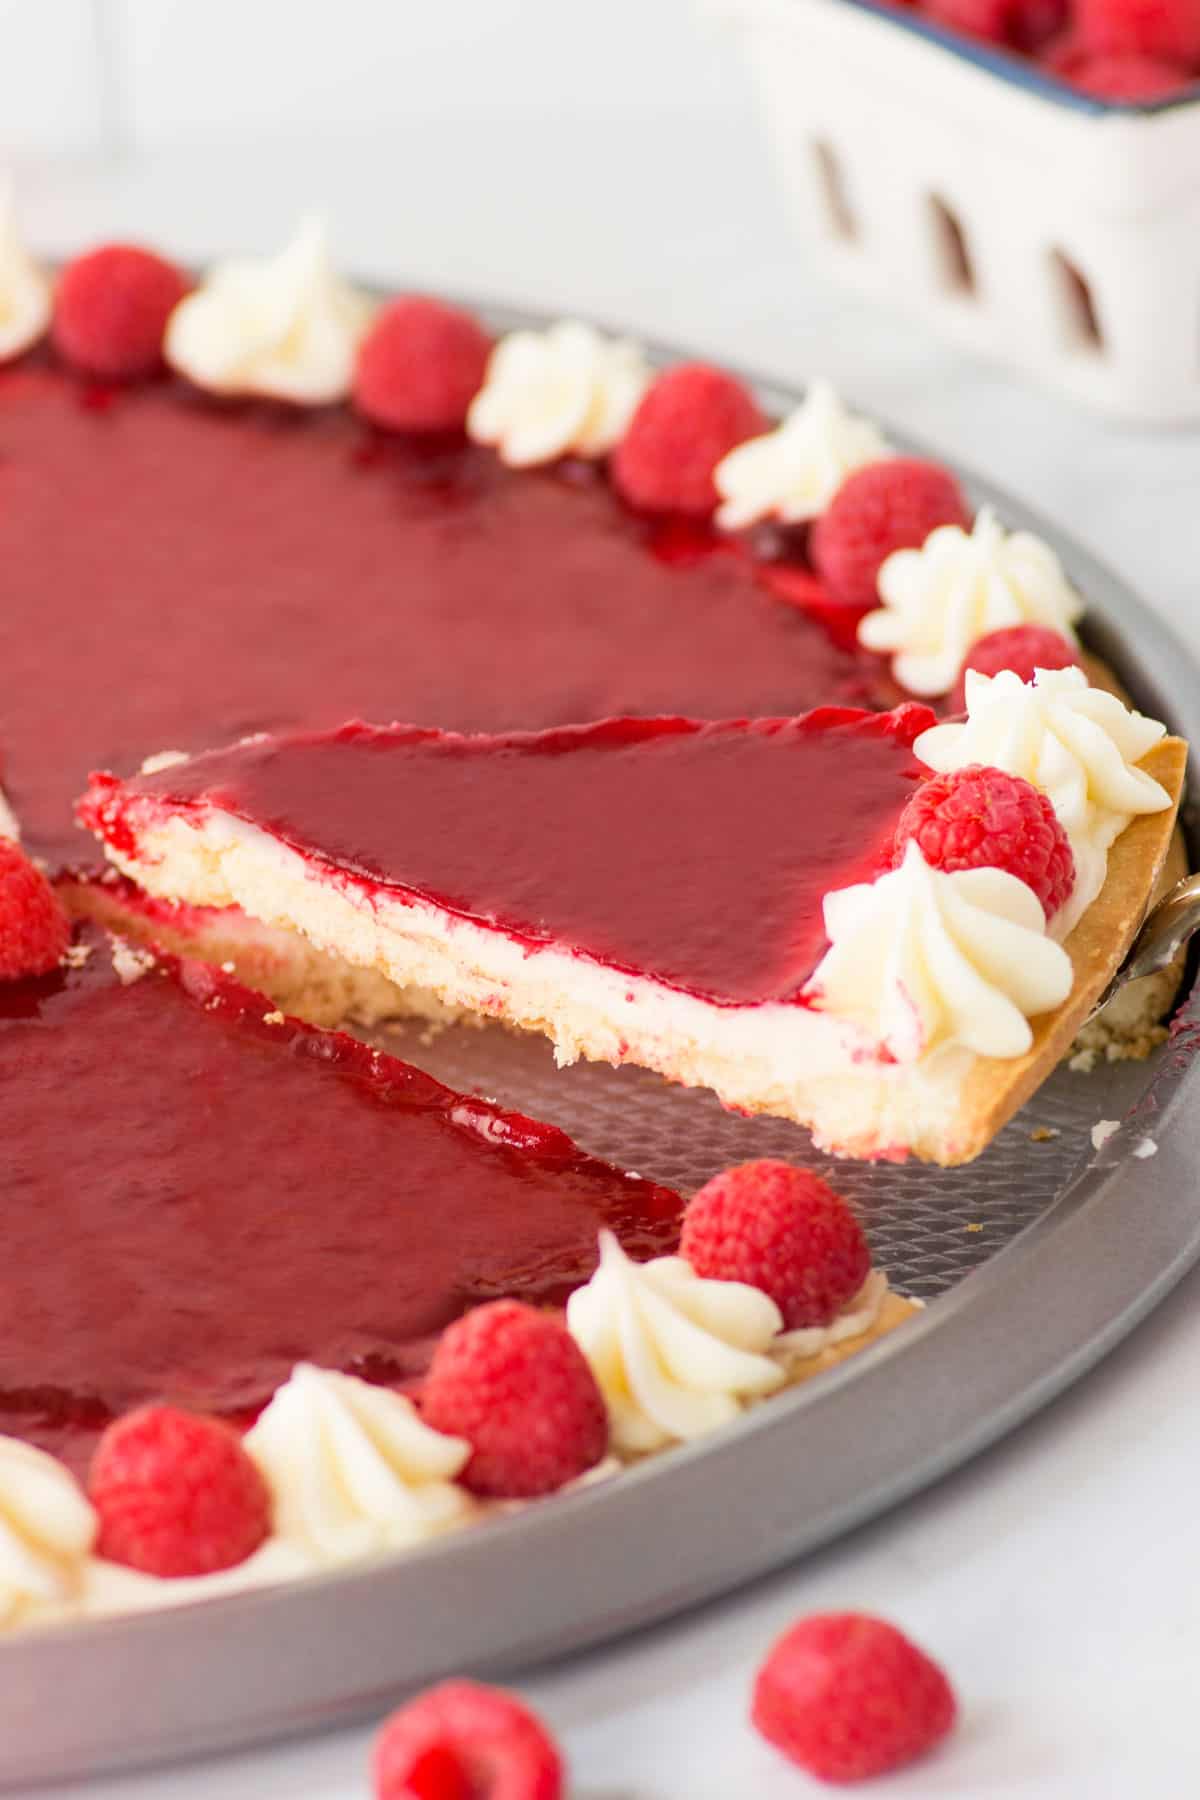 17 Frugal and Free Mother's Day Gift Ideas - Raspberry Tart with a cut piece with a metal spatula with a metal pan.